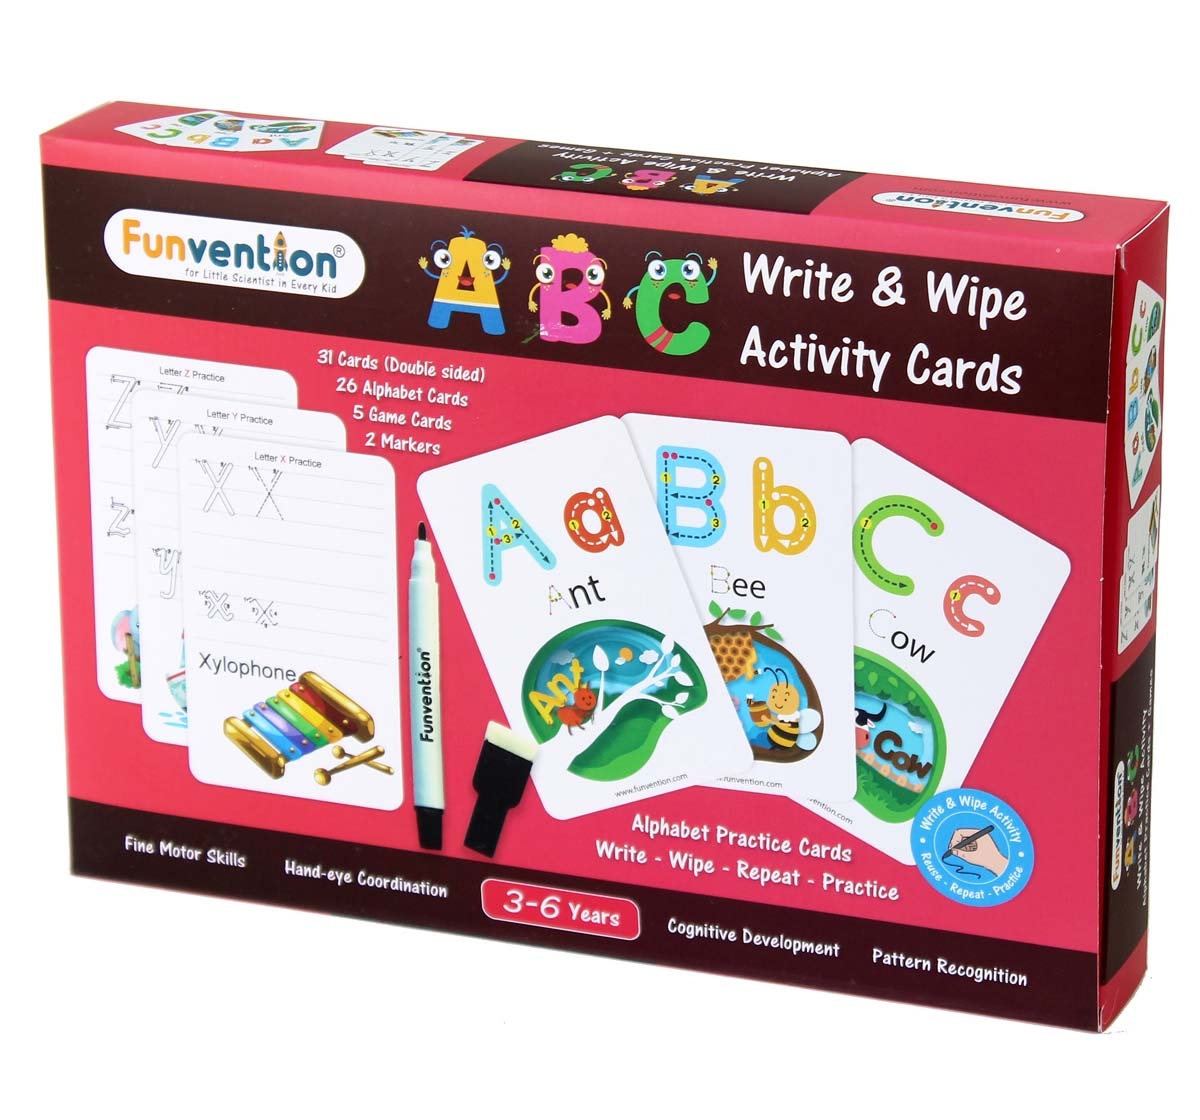 Funvention | Funvention Write & Wipe Activity - Abc Alphabets Science Kits for Kids Age 3Y+